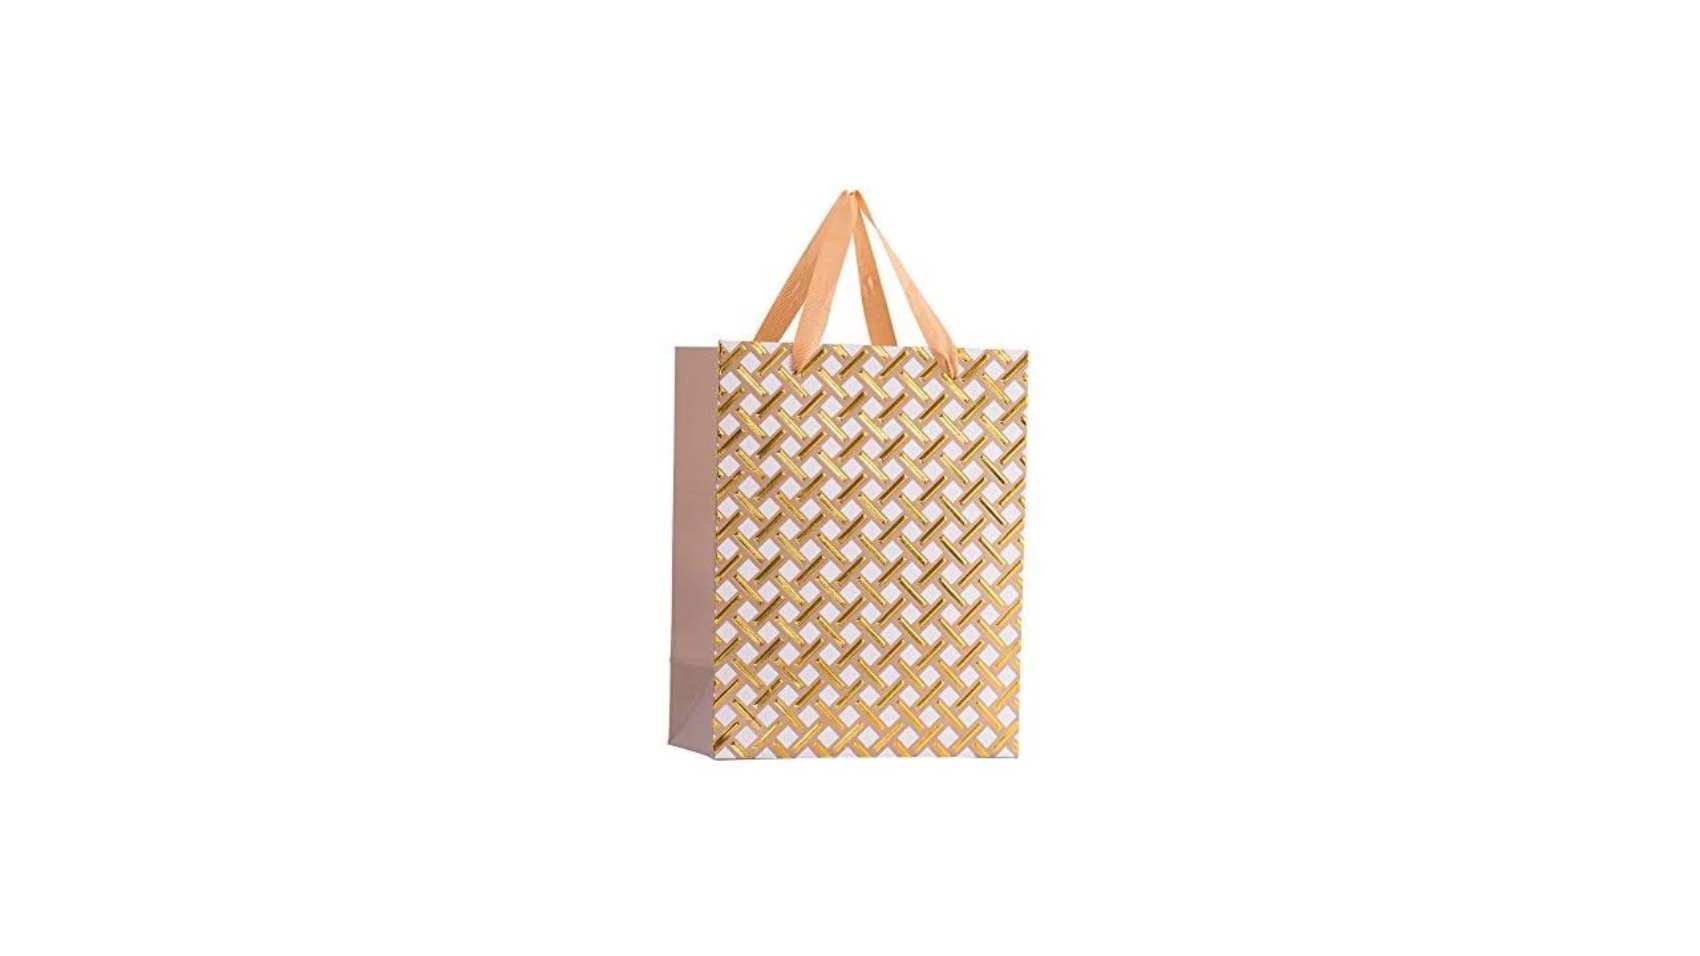  Hammont Wedding Bridesmaid Gift Bag - Checkered Design Party  Favors - 12 Pack Foil Stamped Gift Bag for Hotel Guests - Beautiful  Birthday Present Bags - Durable Ribbon Handles - 9”x